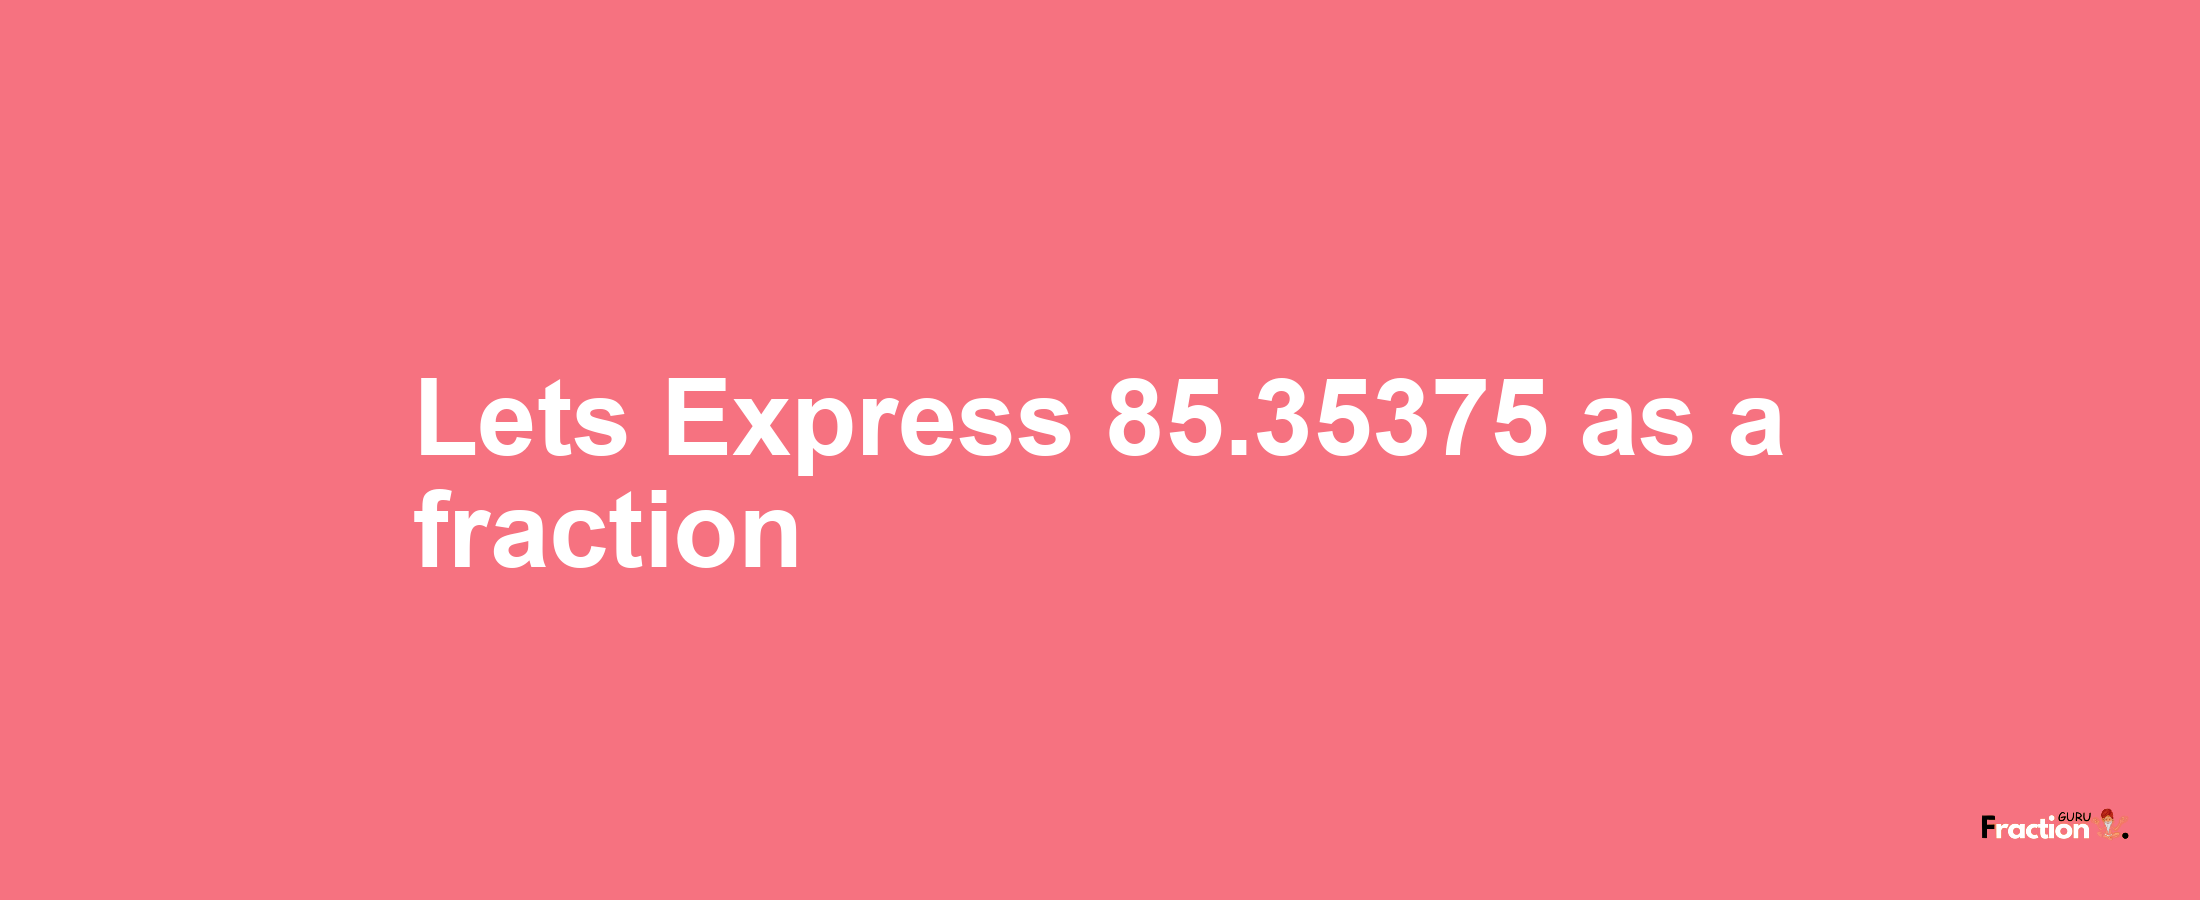 Lets Express 85.35375 as afraction